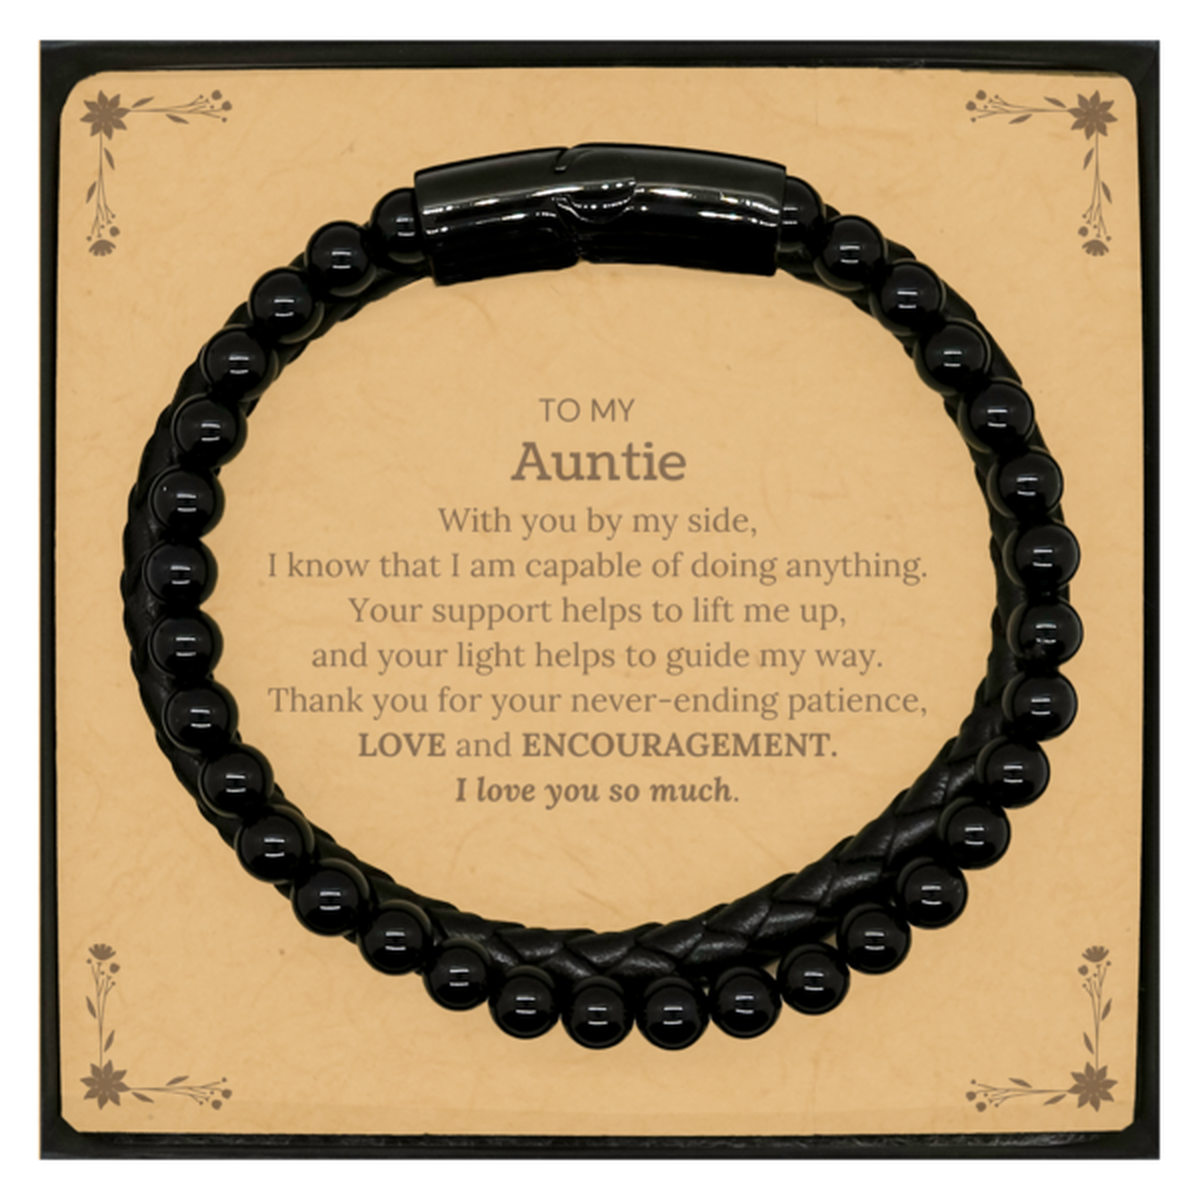 Appreciation Auntie Stone Leather Bracelets Gifts, To My Auntie Birthday Christmas Wedding Keepsake Gifts for Auntie With you by my side, I know that I am capable of doing anything. I love you so much